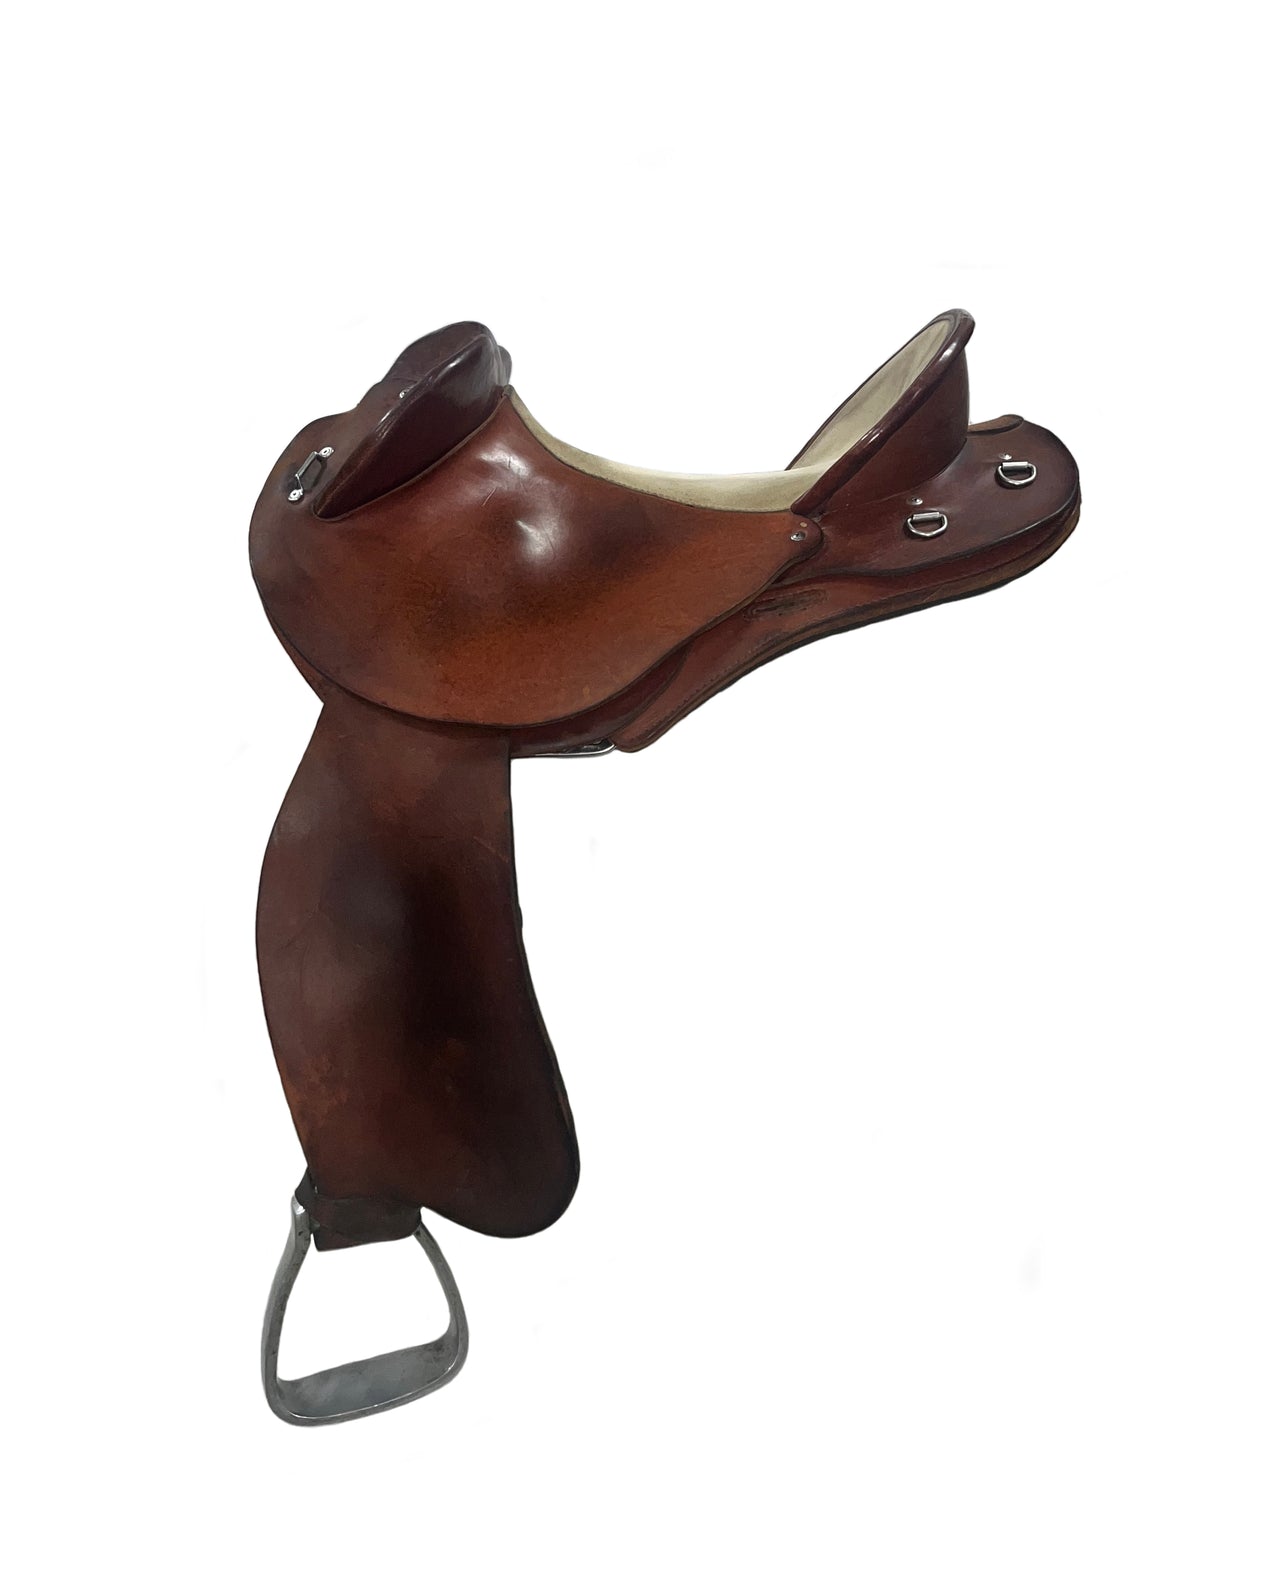 Cloncurry Fender Saddle 17 Inch Second Hand